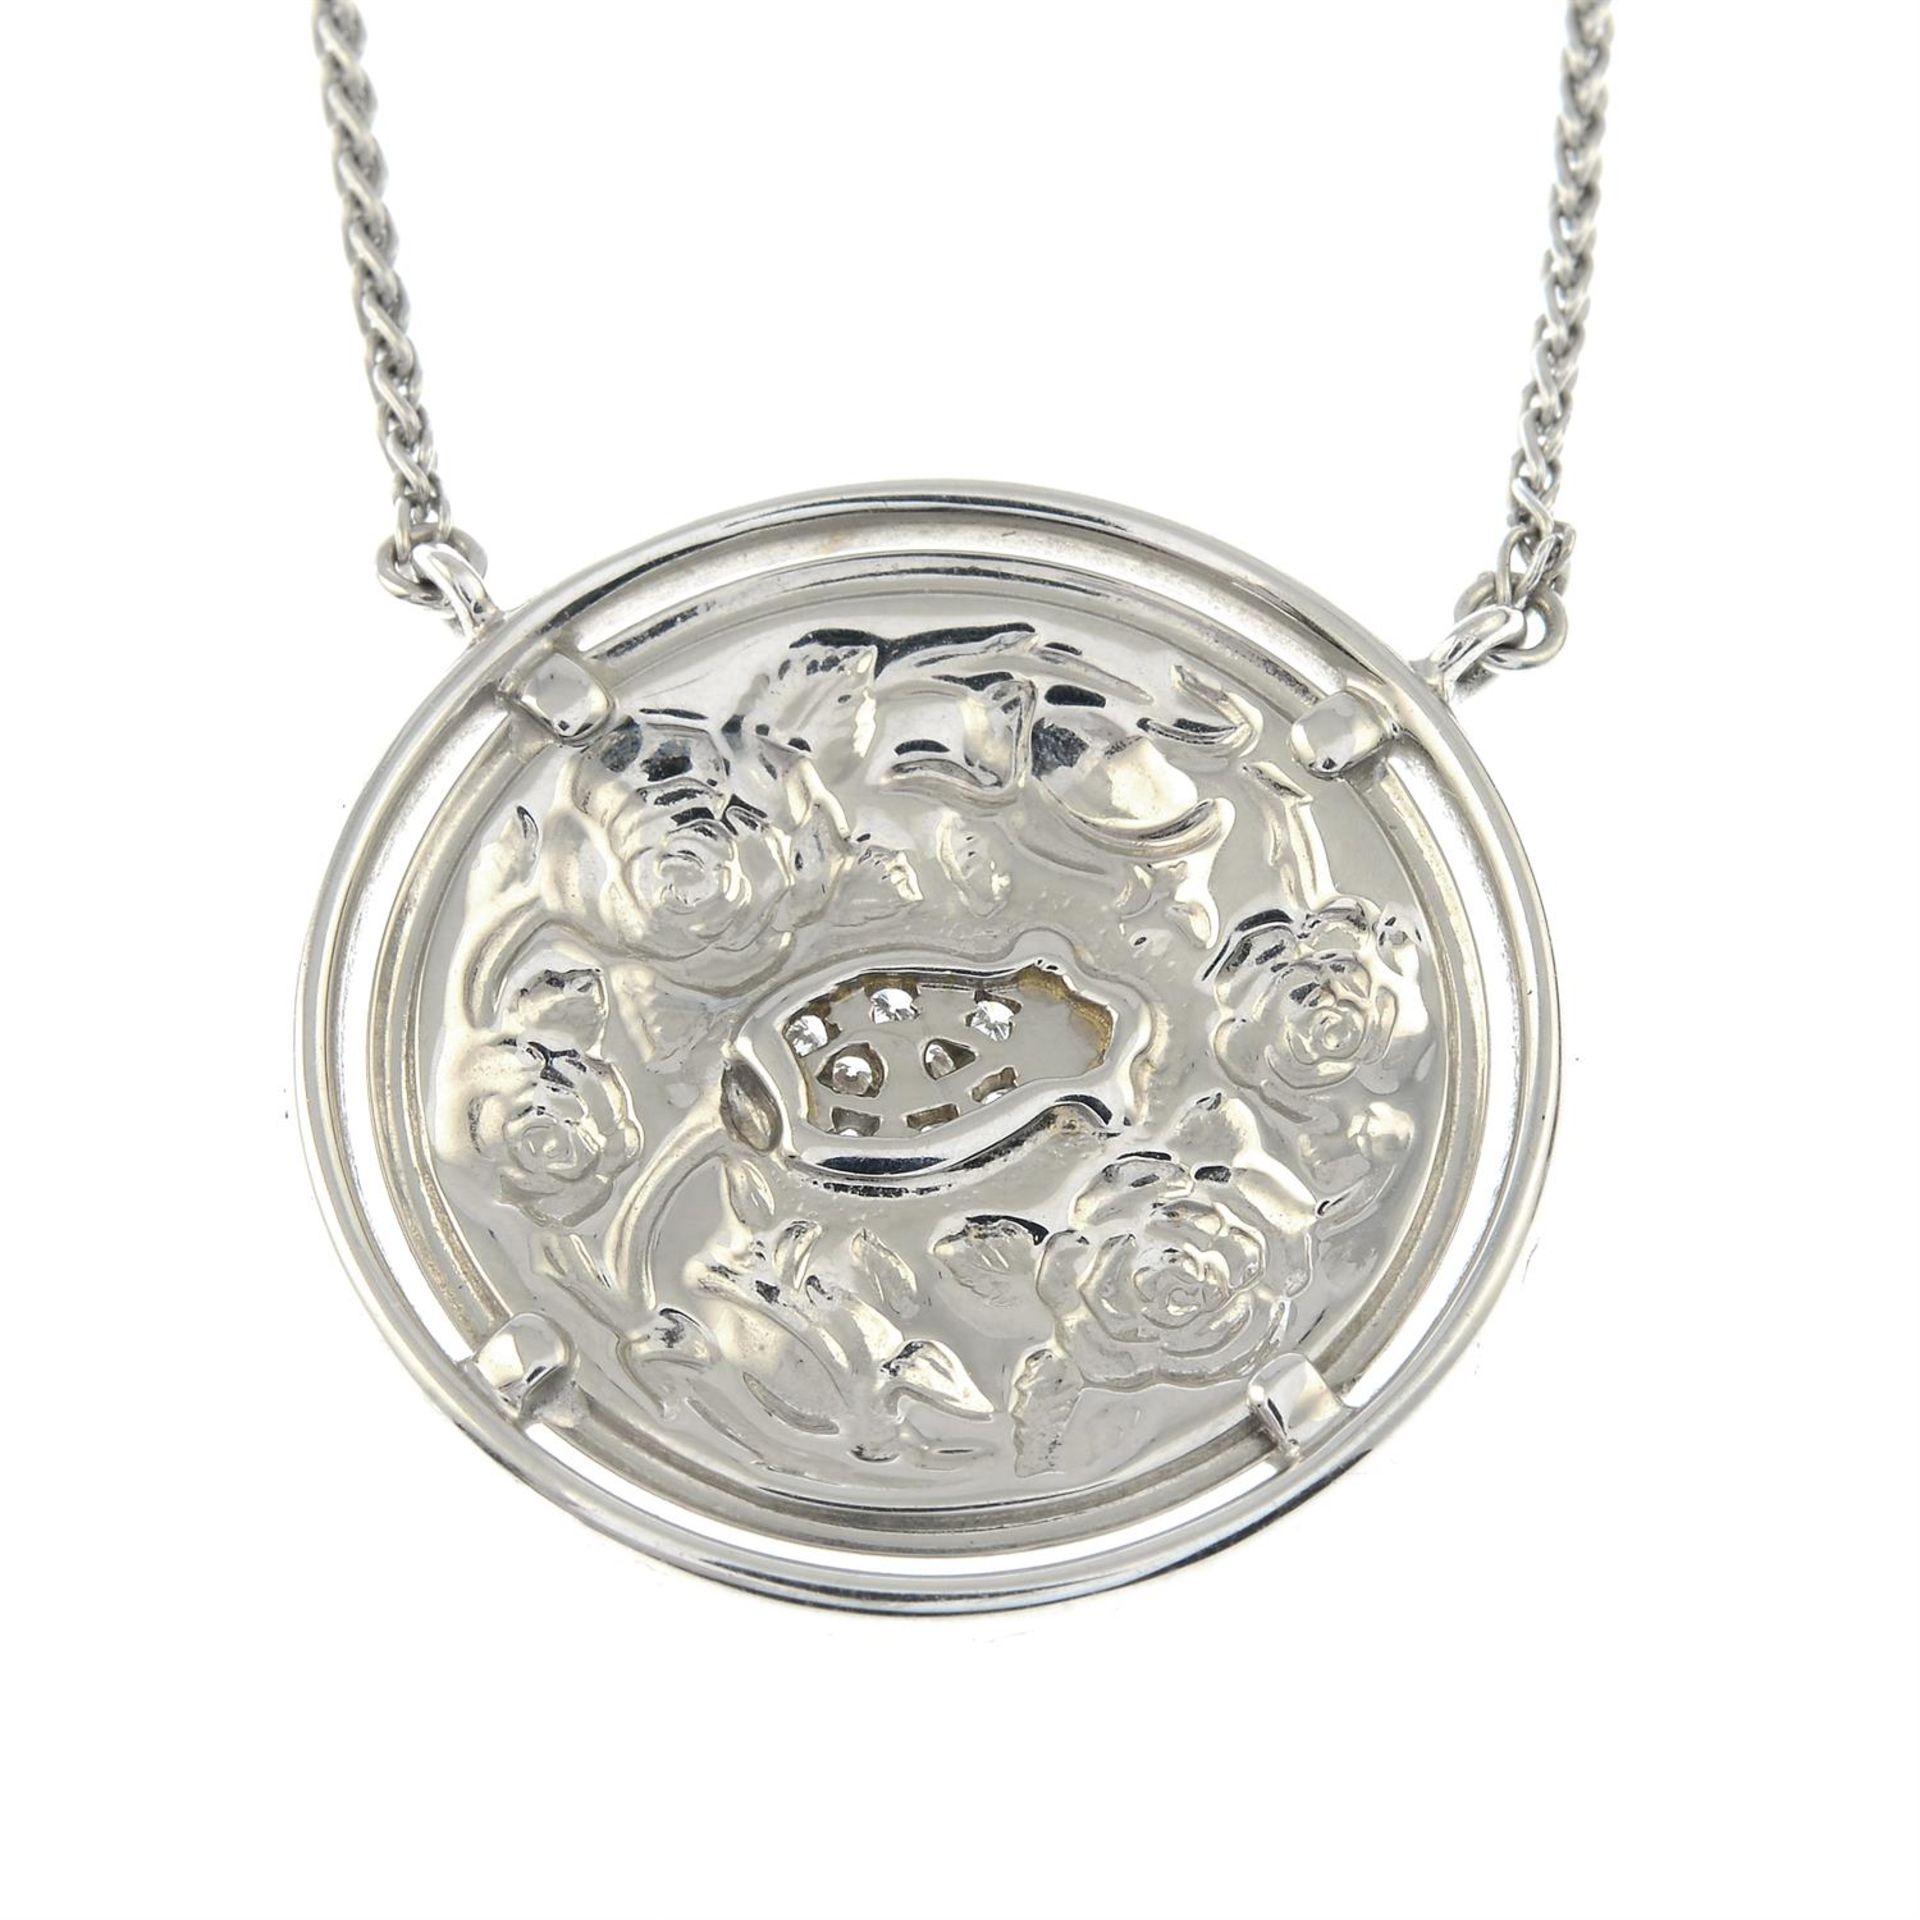 A diamond highlight, chased floral pendant on chain, by Carrera y Carrera. - Image 3 of 5